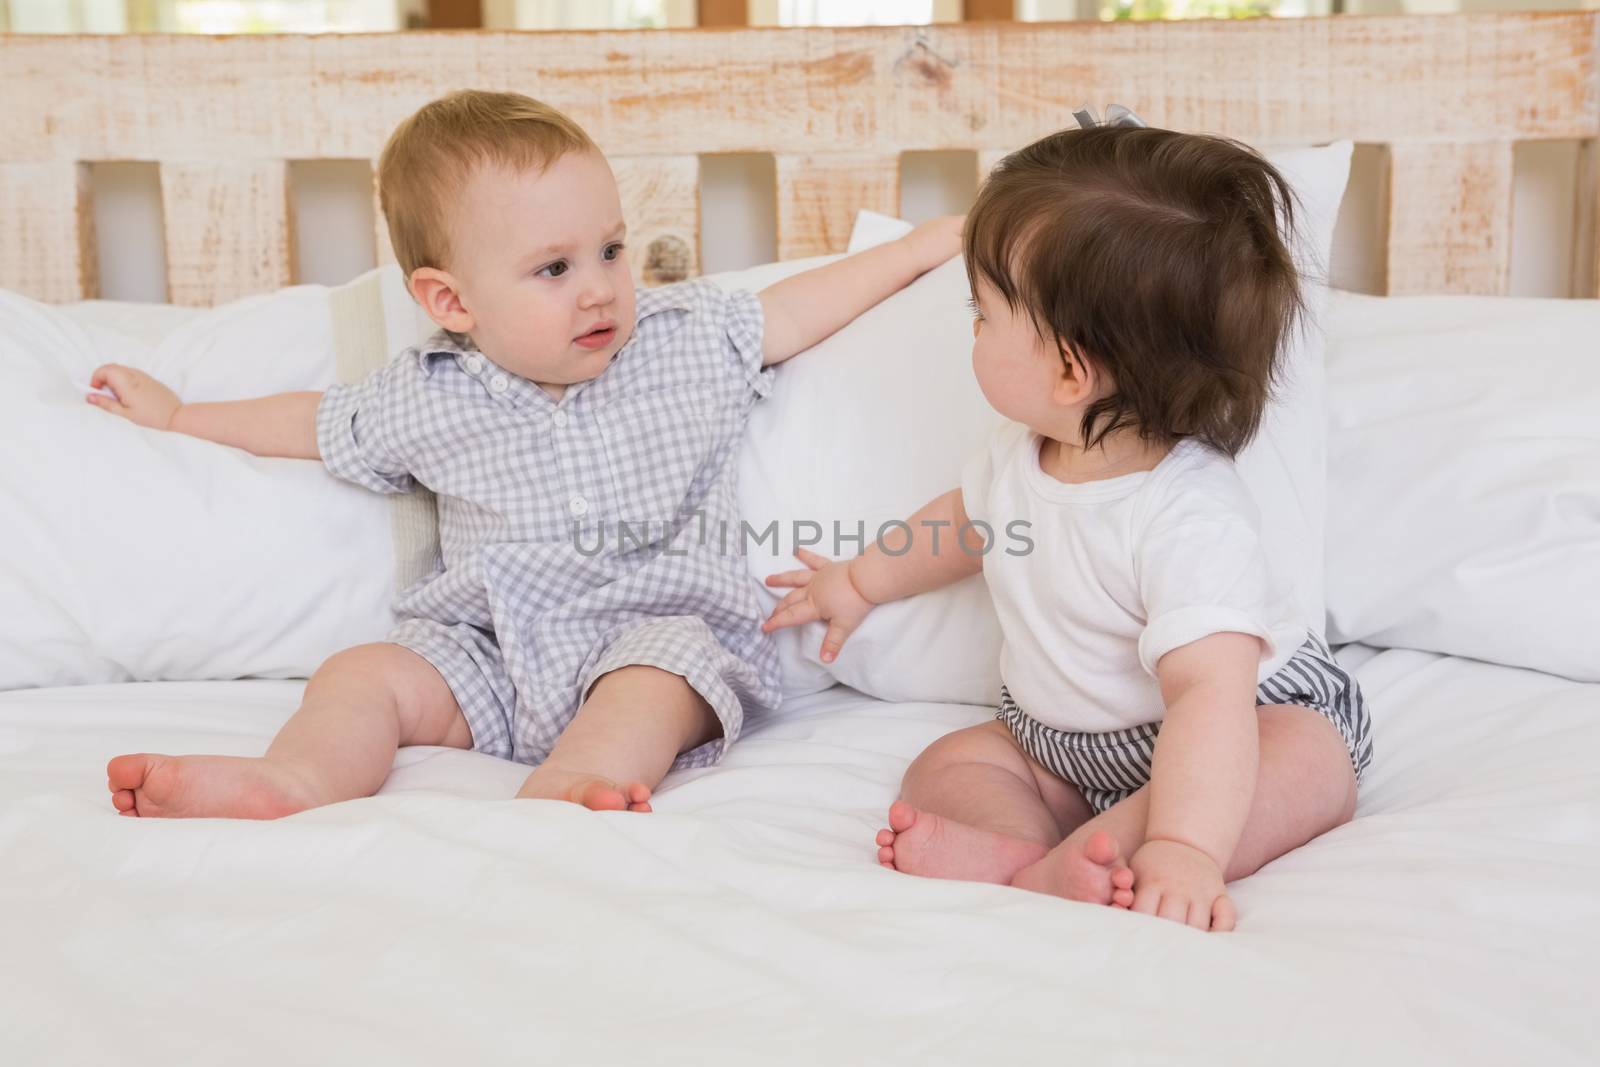 Very beautiful cute babies boy and girl at home in bedroom